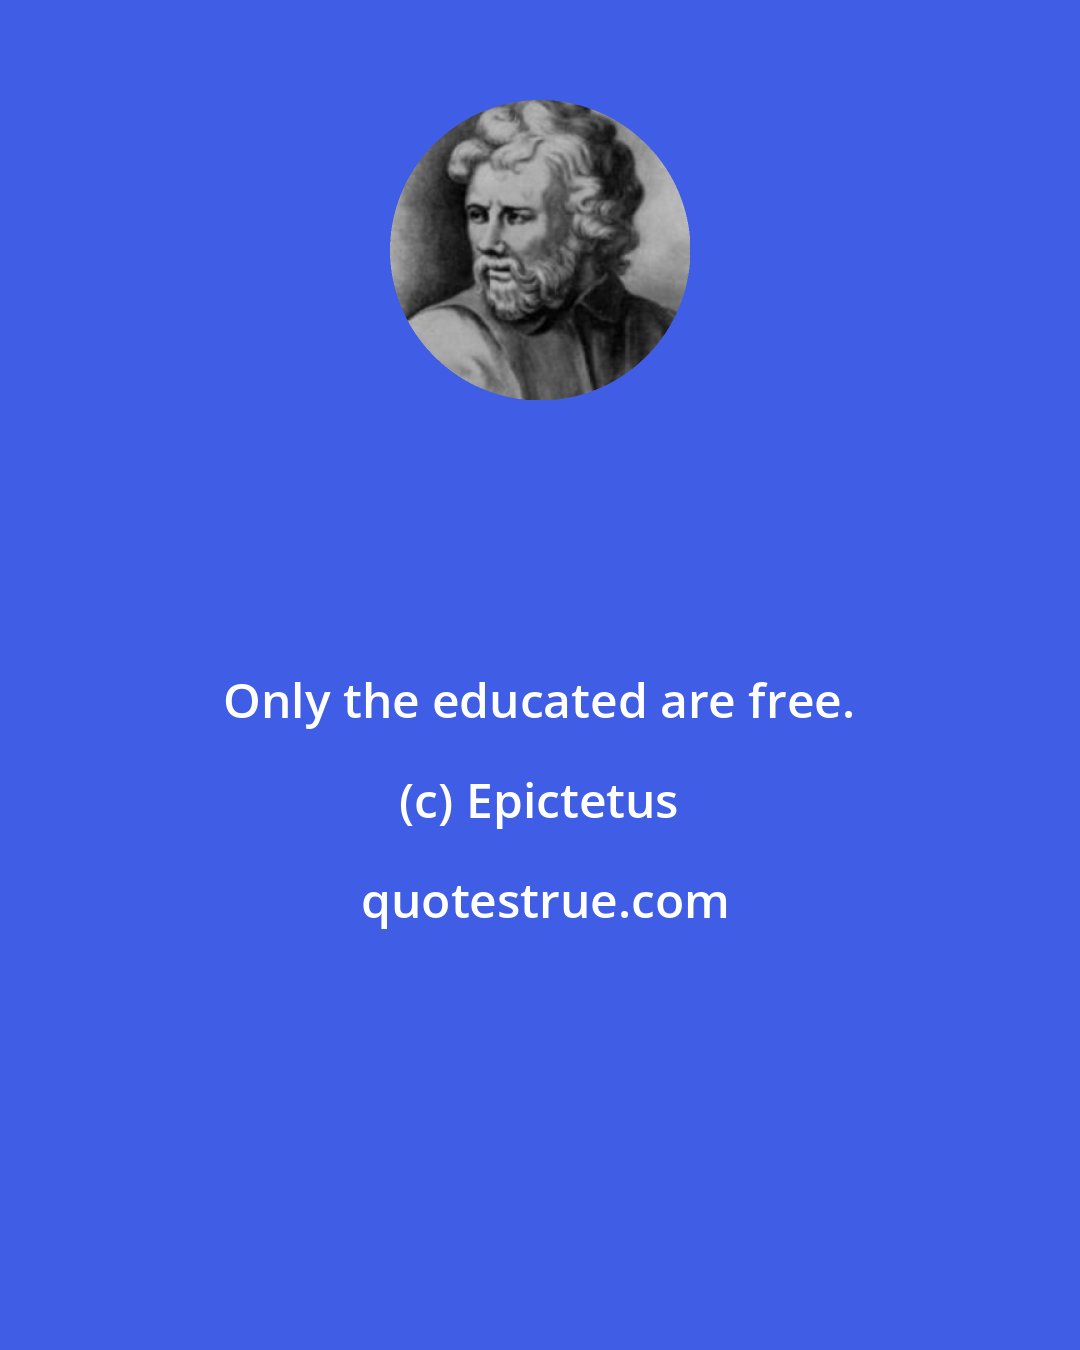 Epictetus: Only the educated are free.